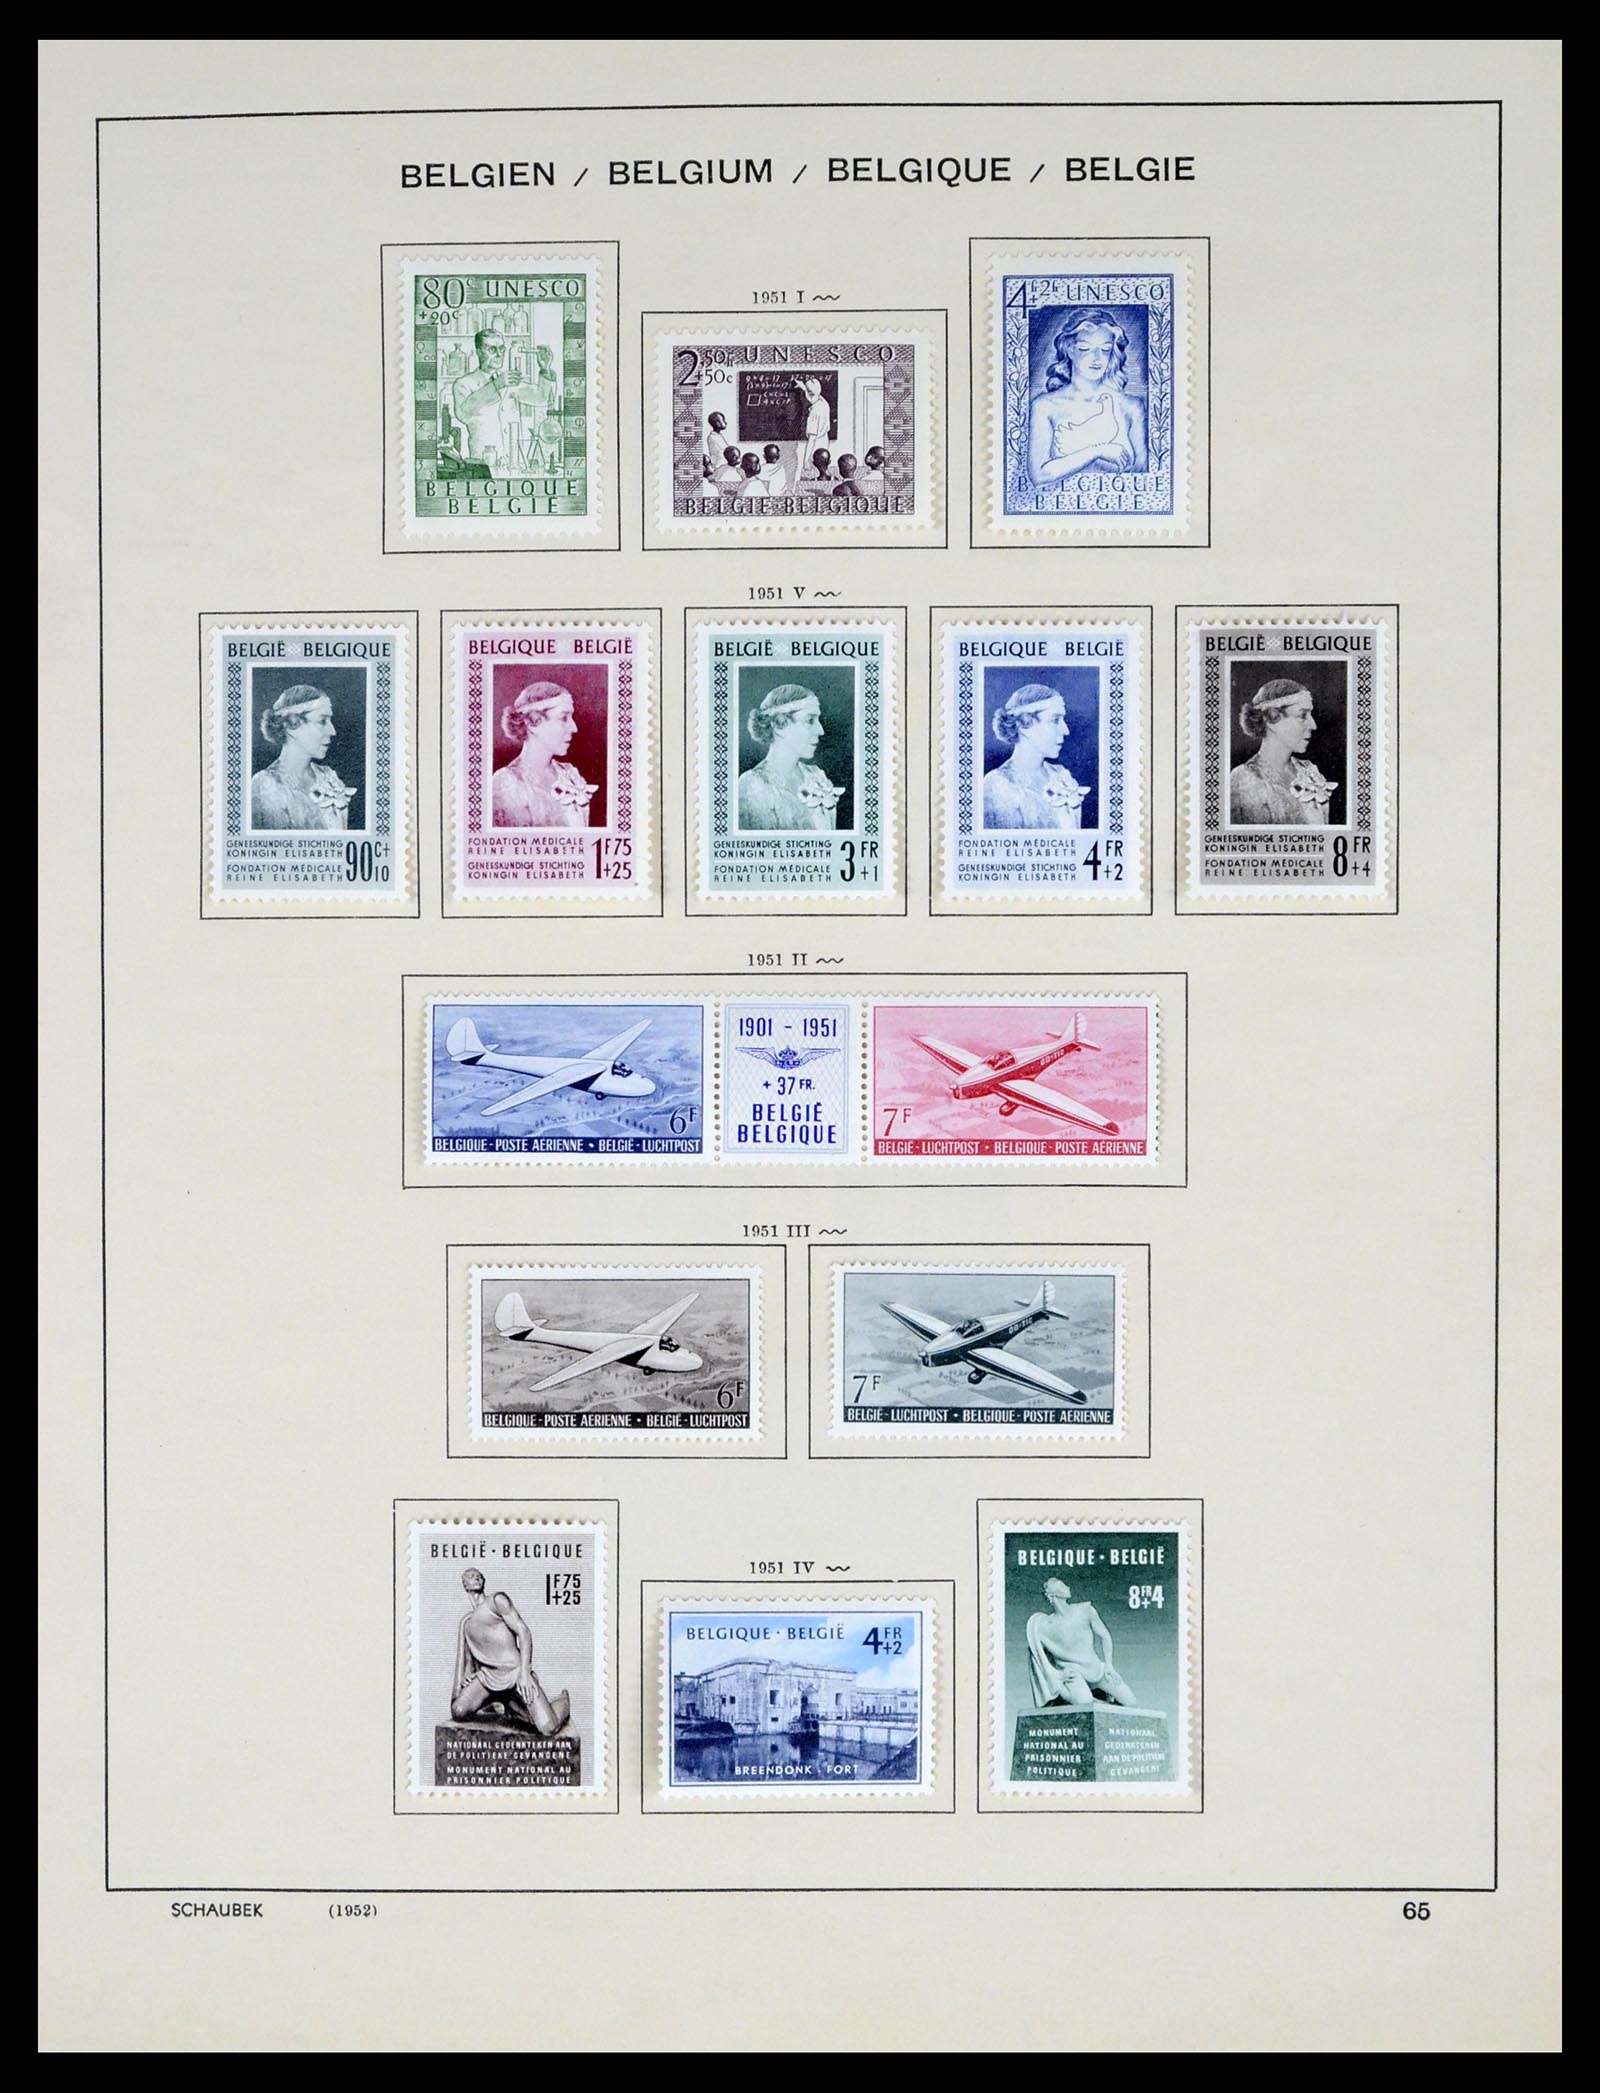 37595 077 - Stamp collection 37595 Super collection Belgium 1849-2015!